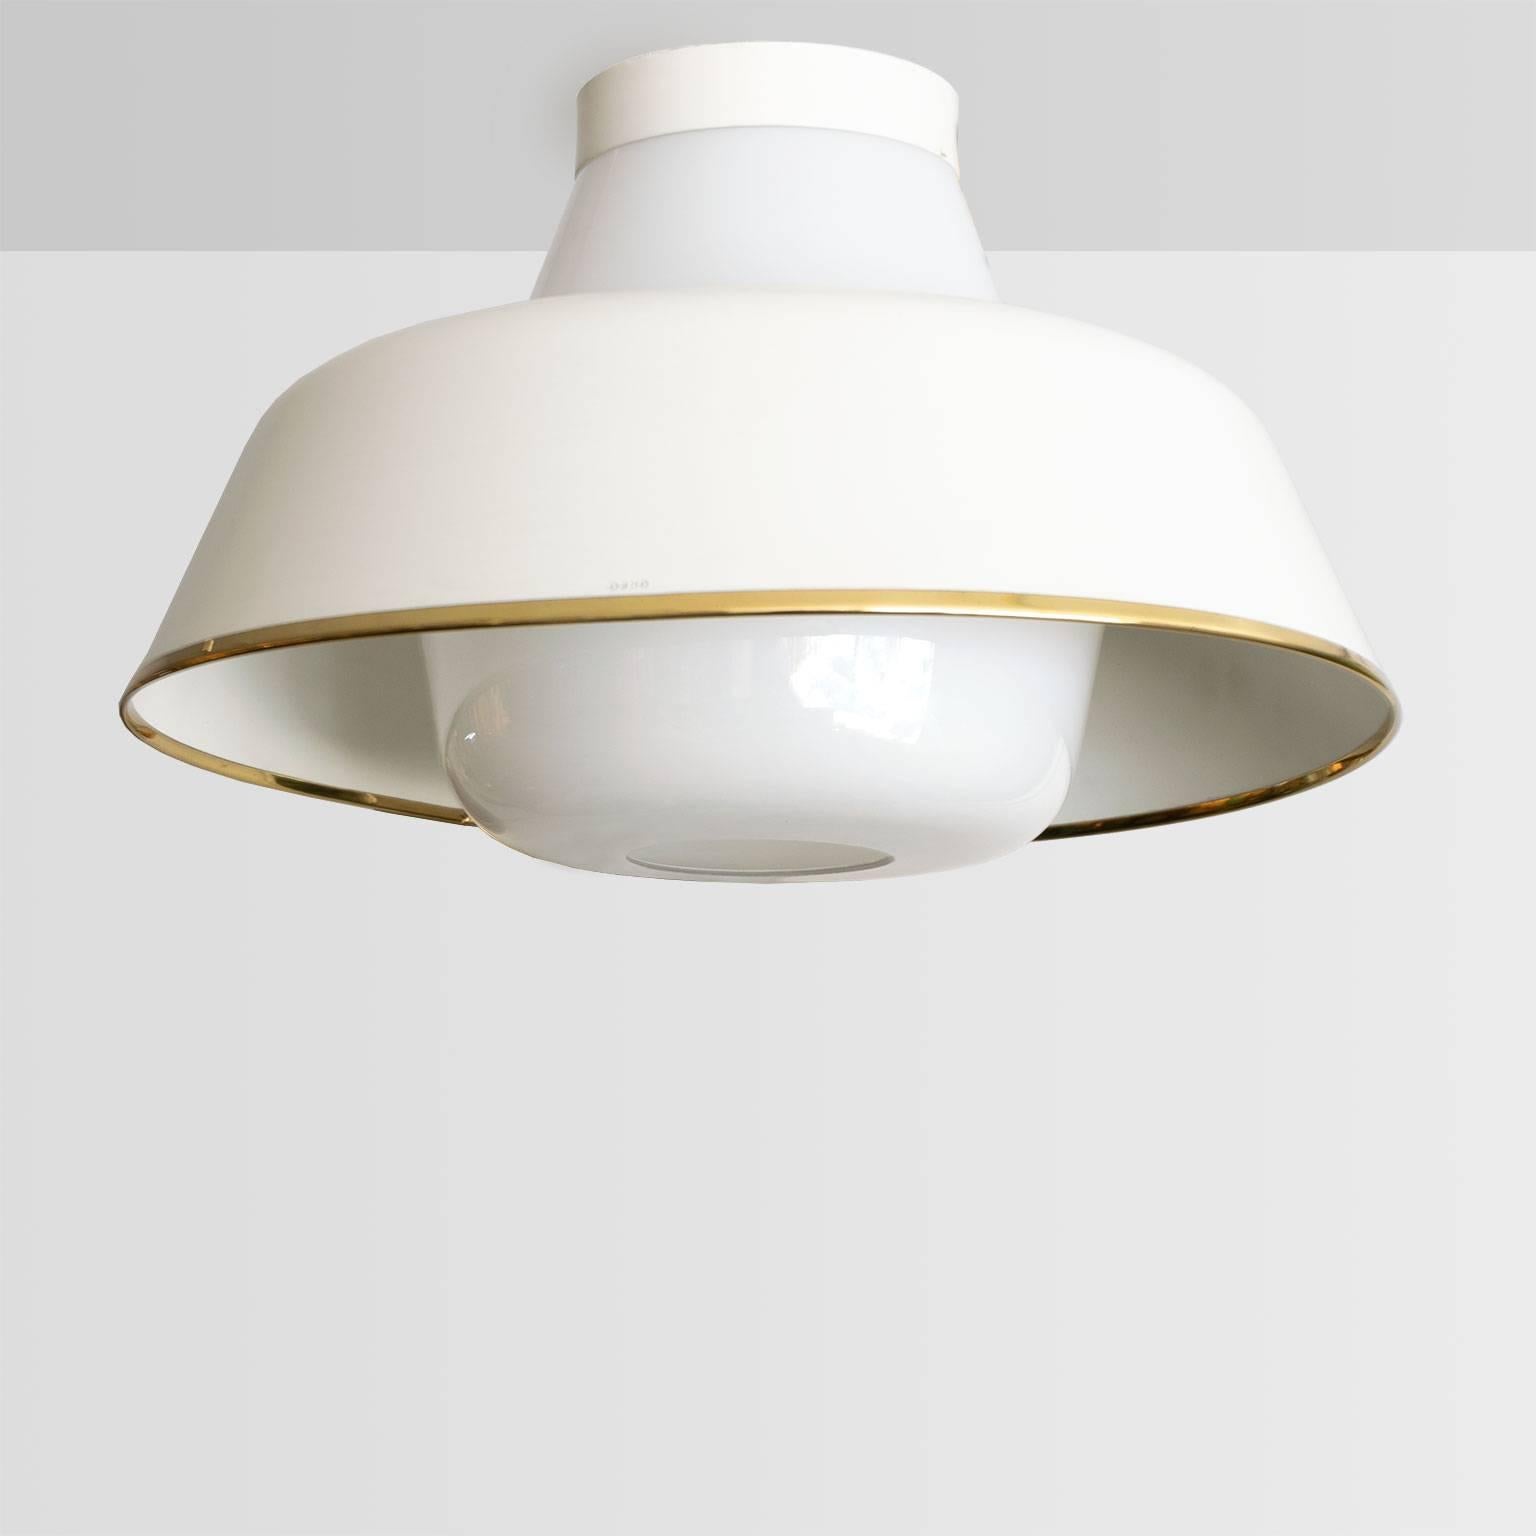 Scandinavian modern flush mount fixture made of lacquered metal trimmed with polished brass and opal glass. This fixture has one Edison standard base socket (newly rewired for the USA). Made by Orno Oy for Stockmans, Helsinki, Finland